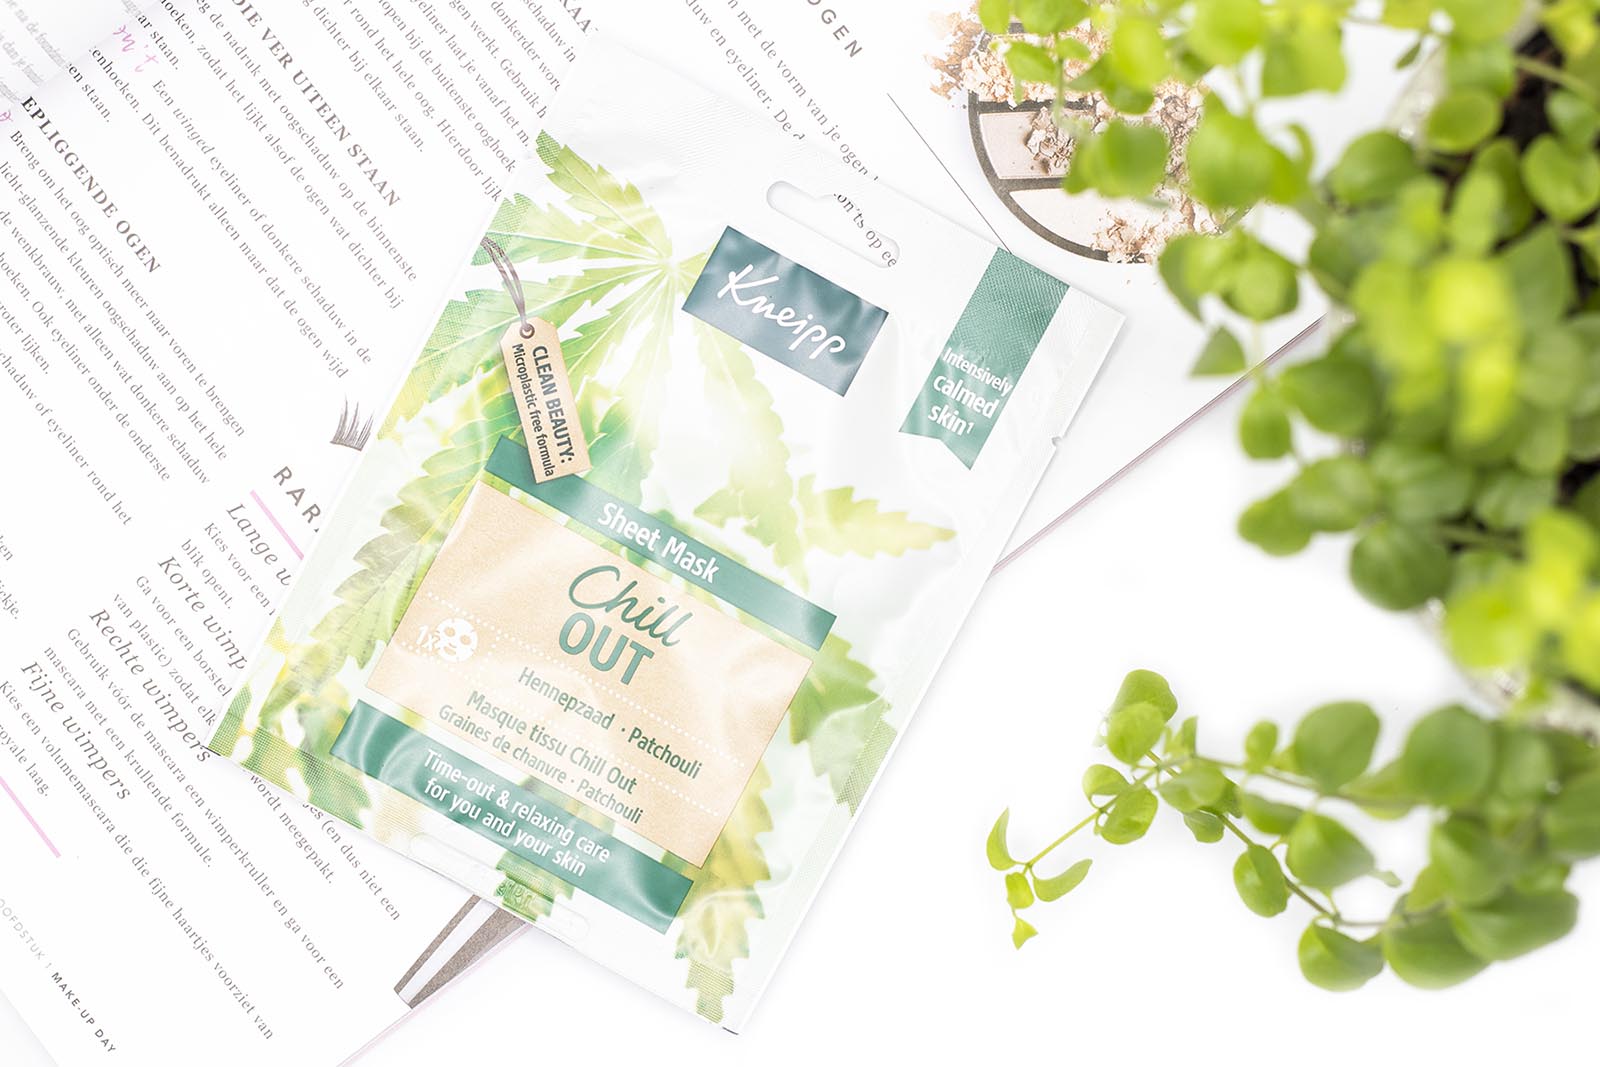 kneipp sheet mask chill out